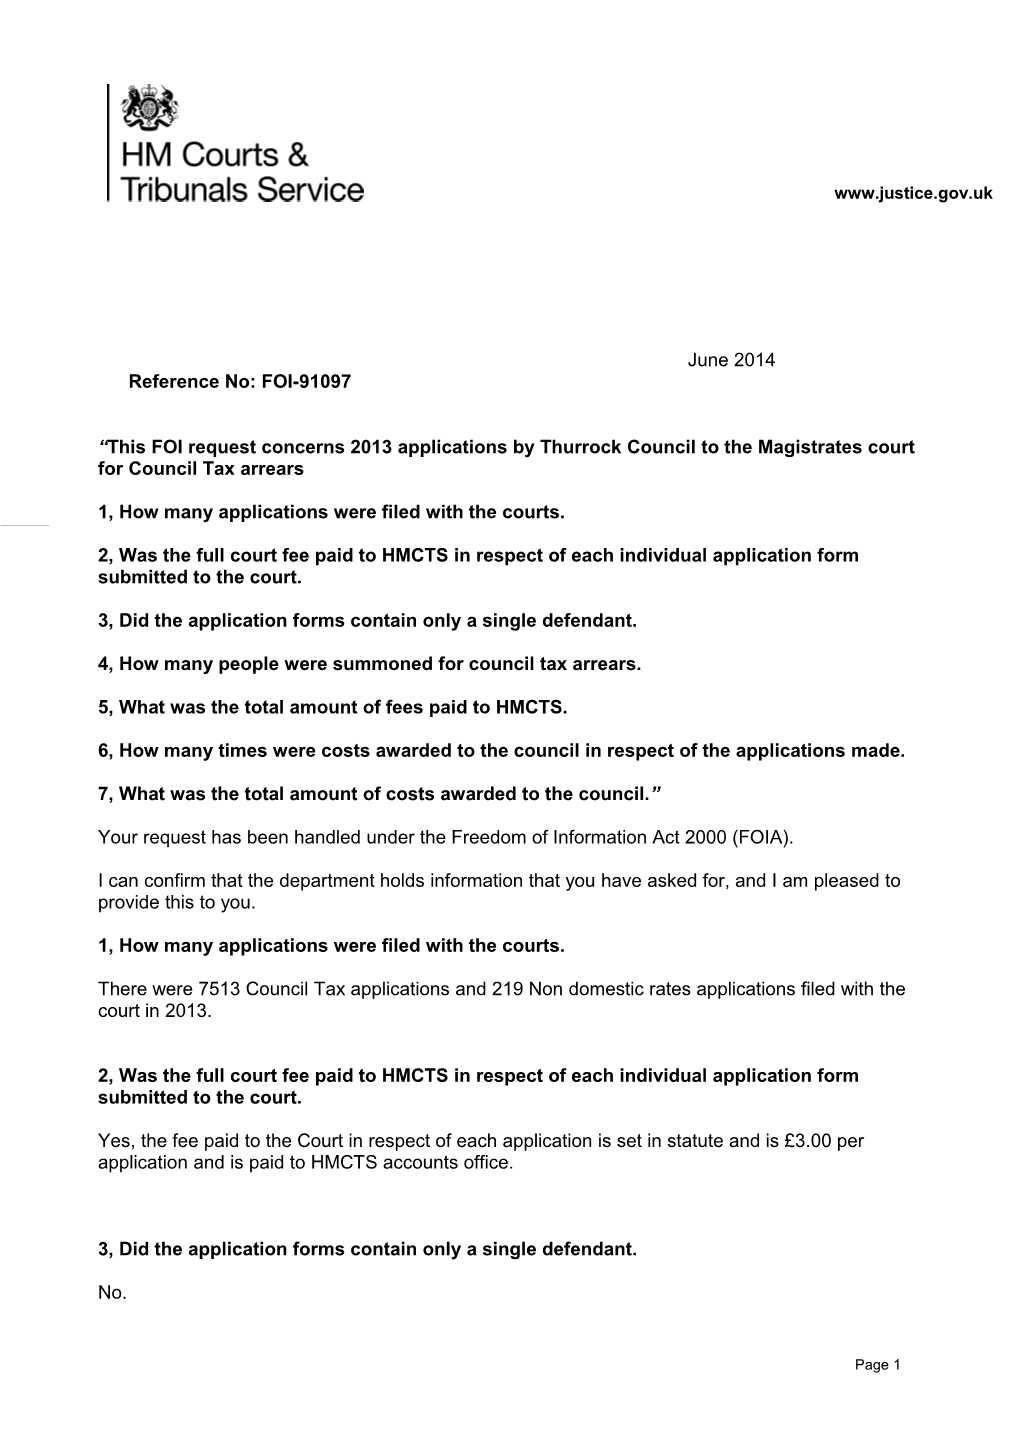 2013 Applications by Thurrock Council to the Magistrates Court for Council Tax Arrears